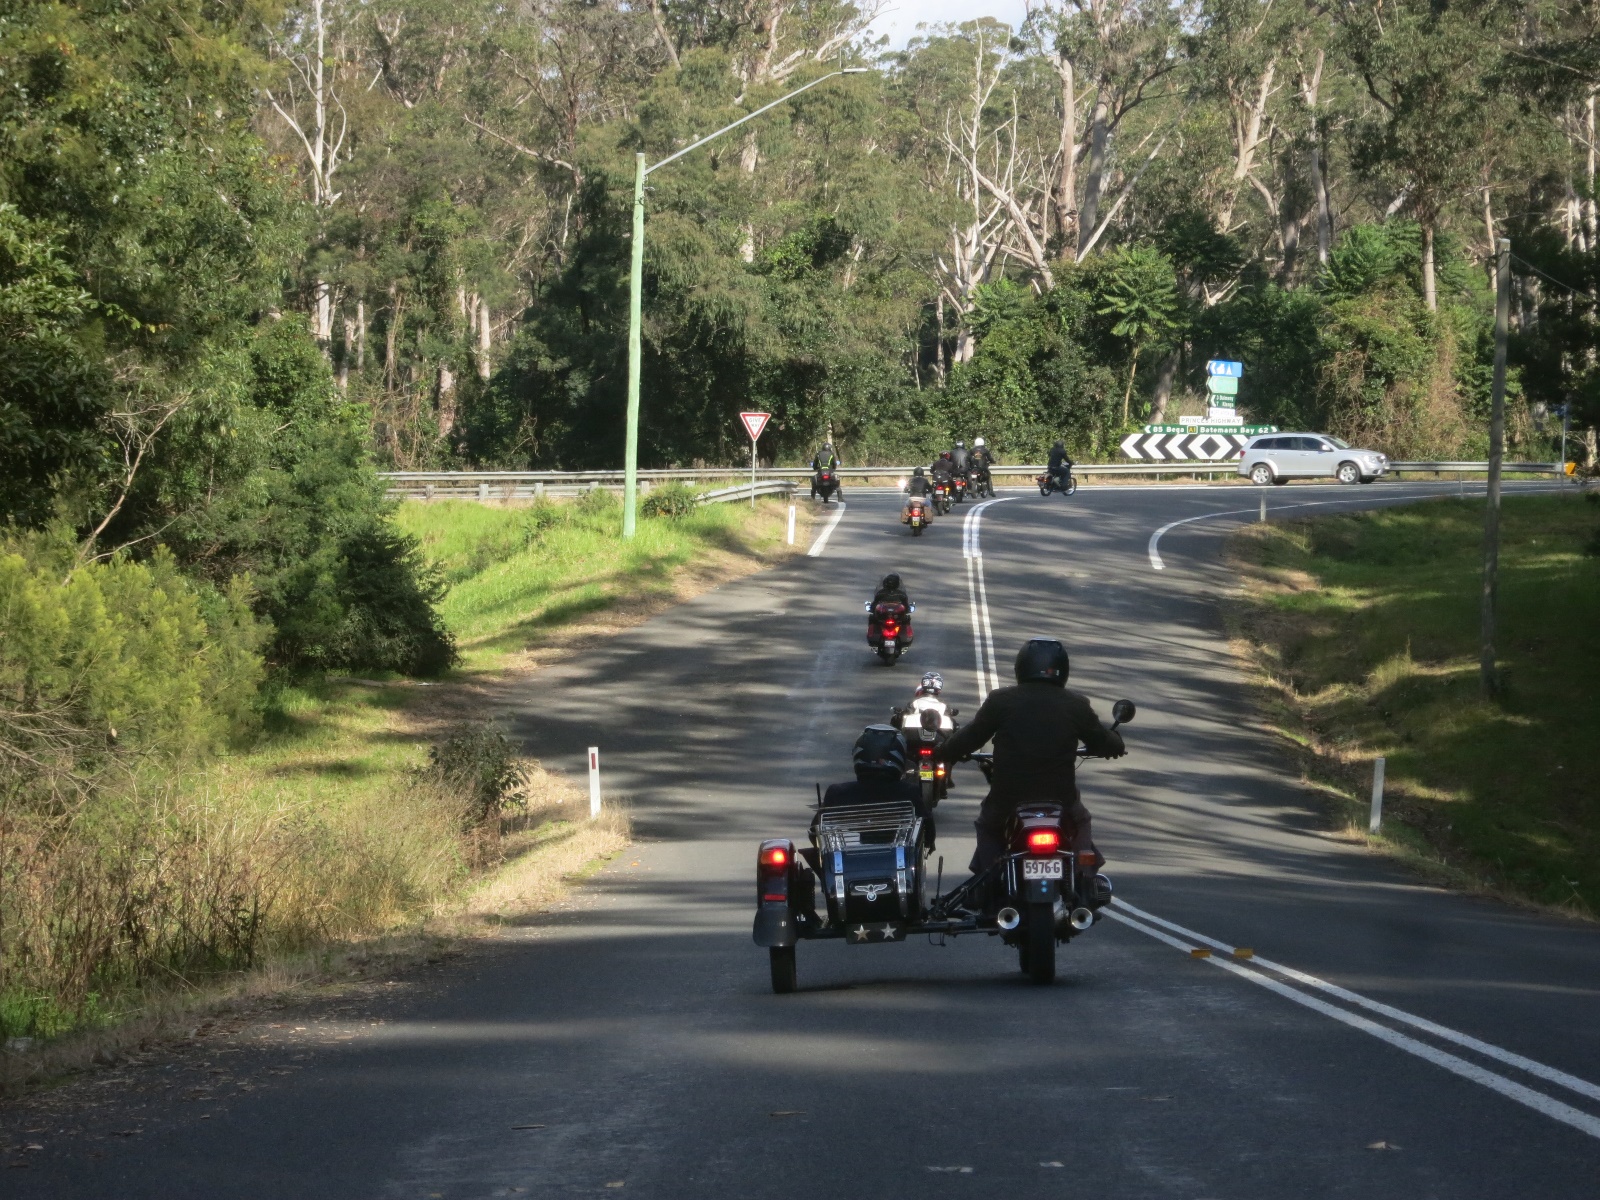 A group of people ride motorcycles down a road Description automatically generated with medium confidence